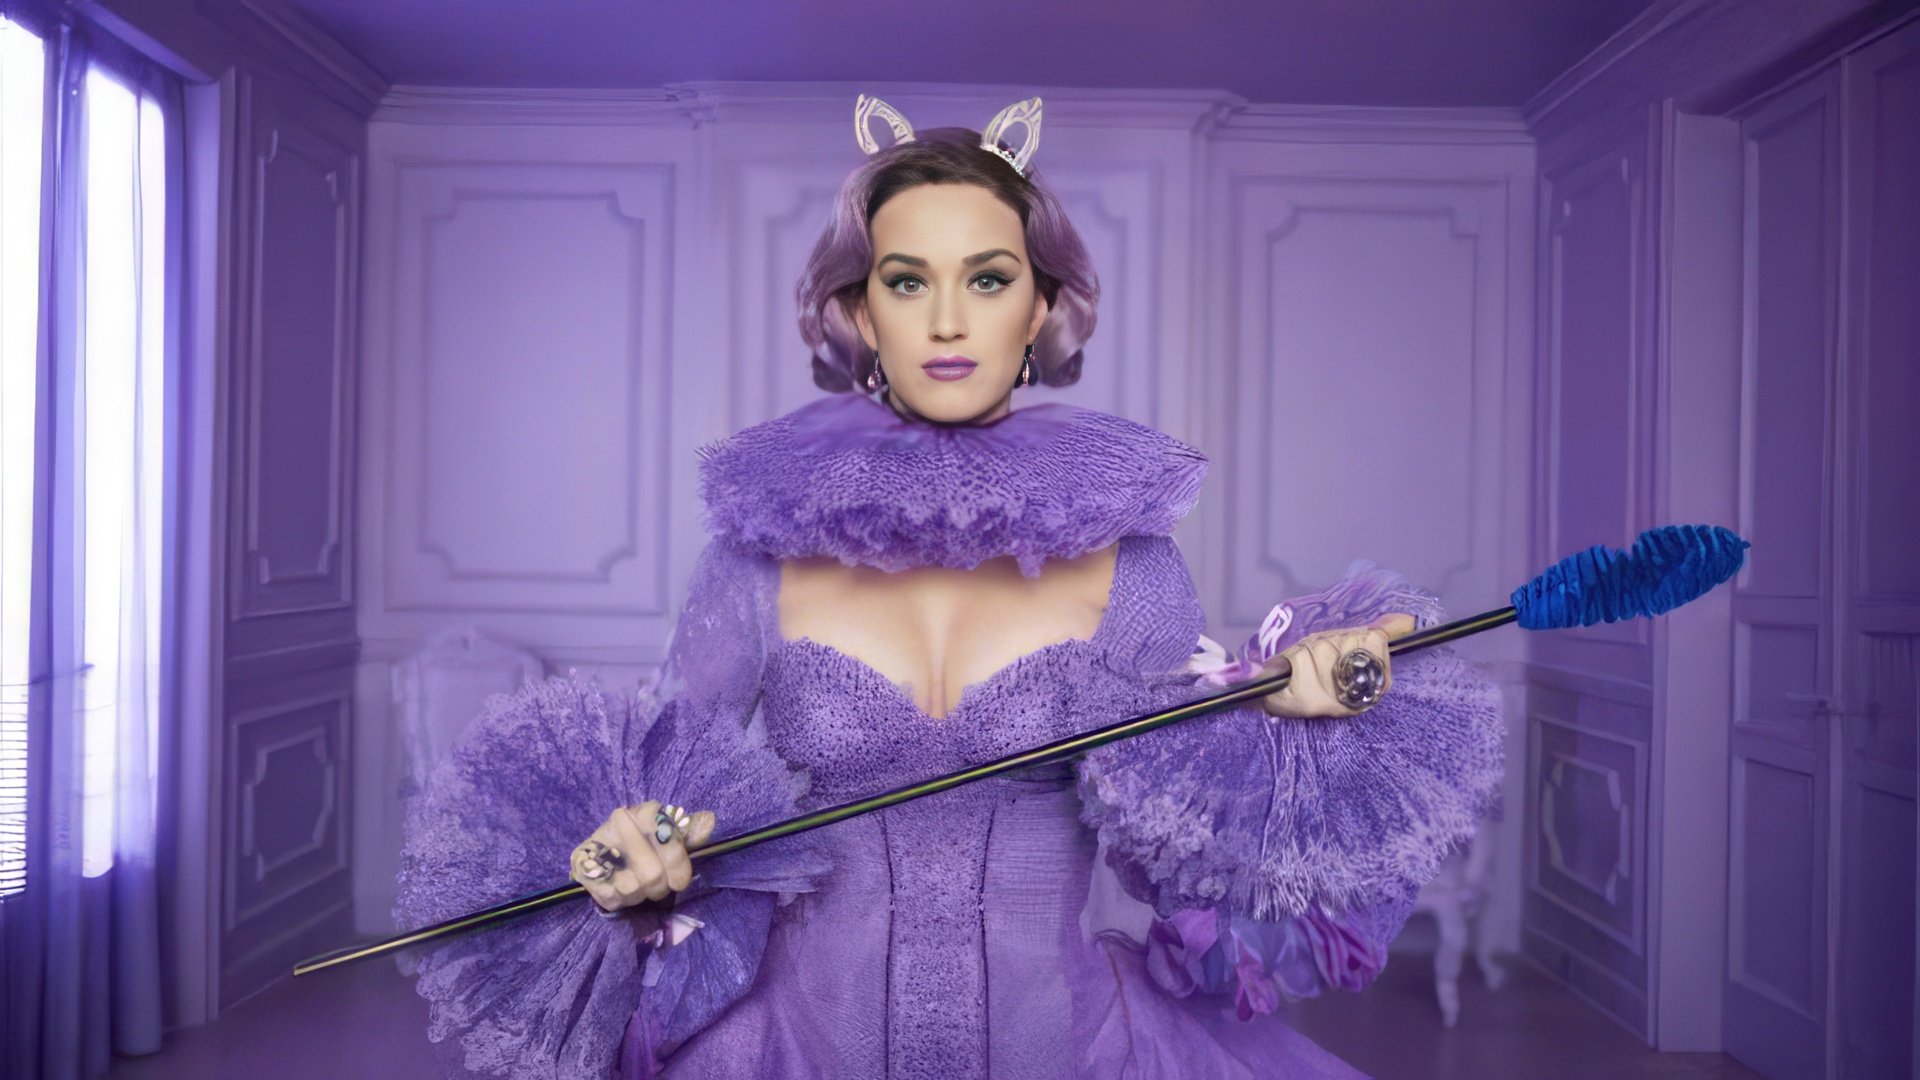 Katy Perry's clips are always colorful and captivating